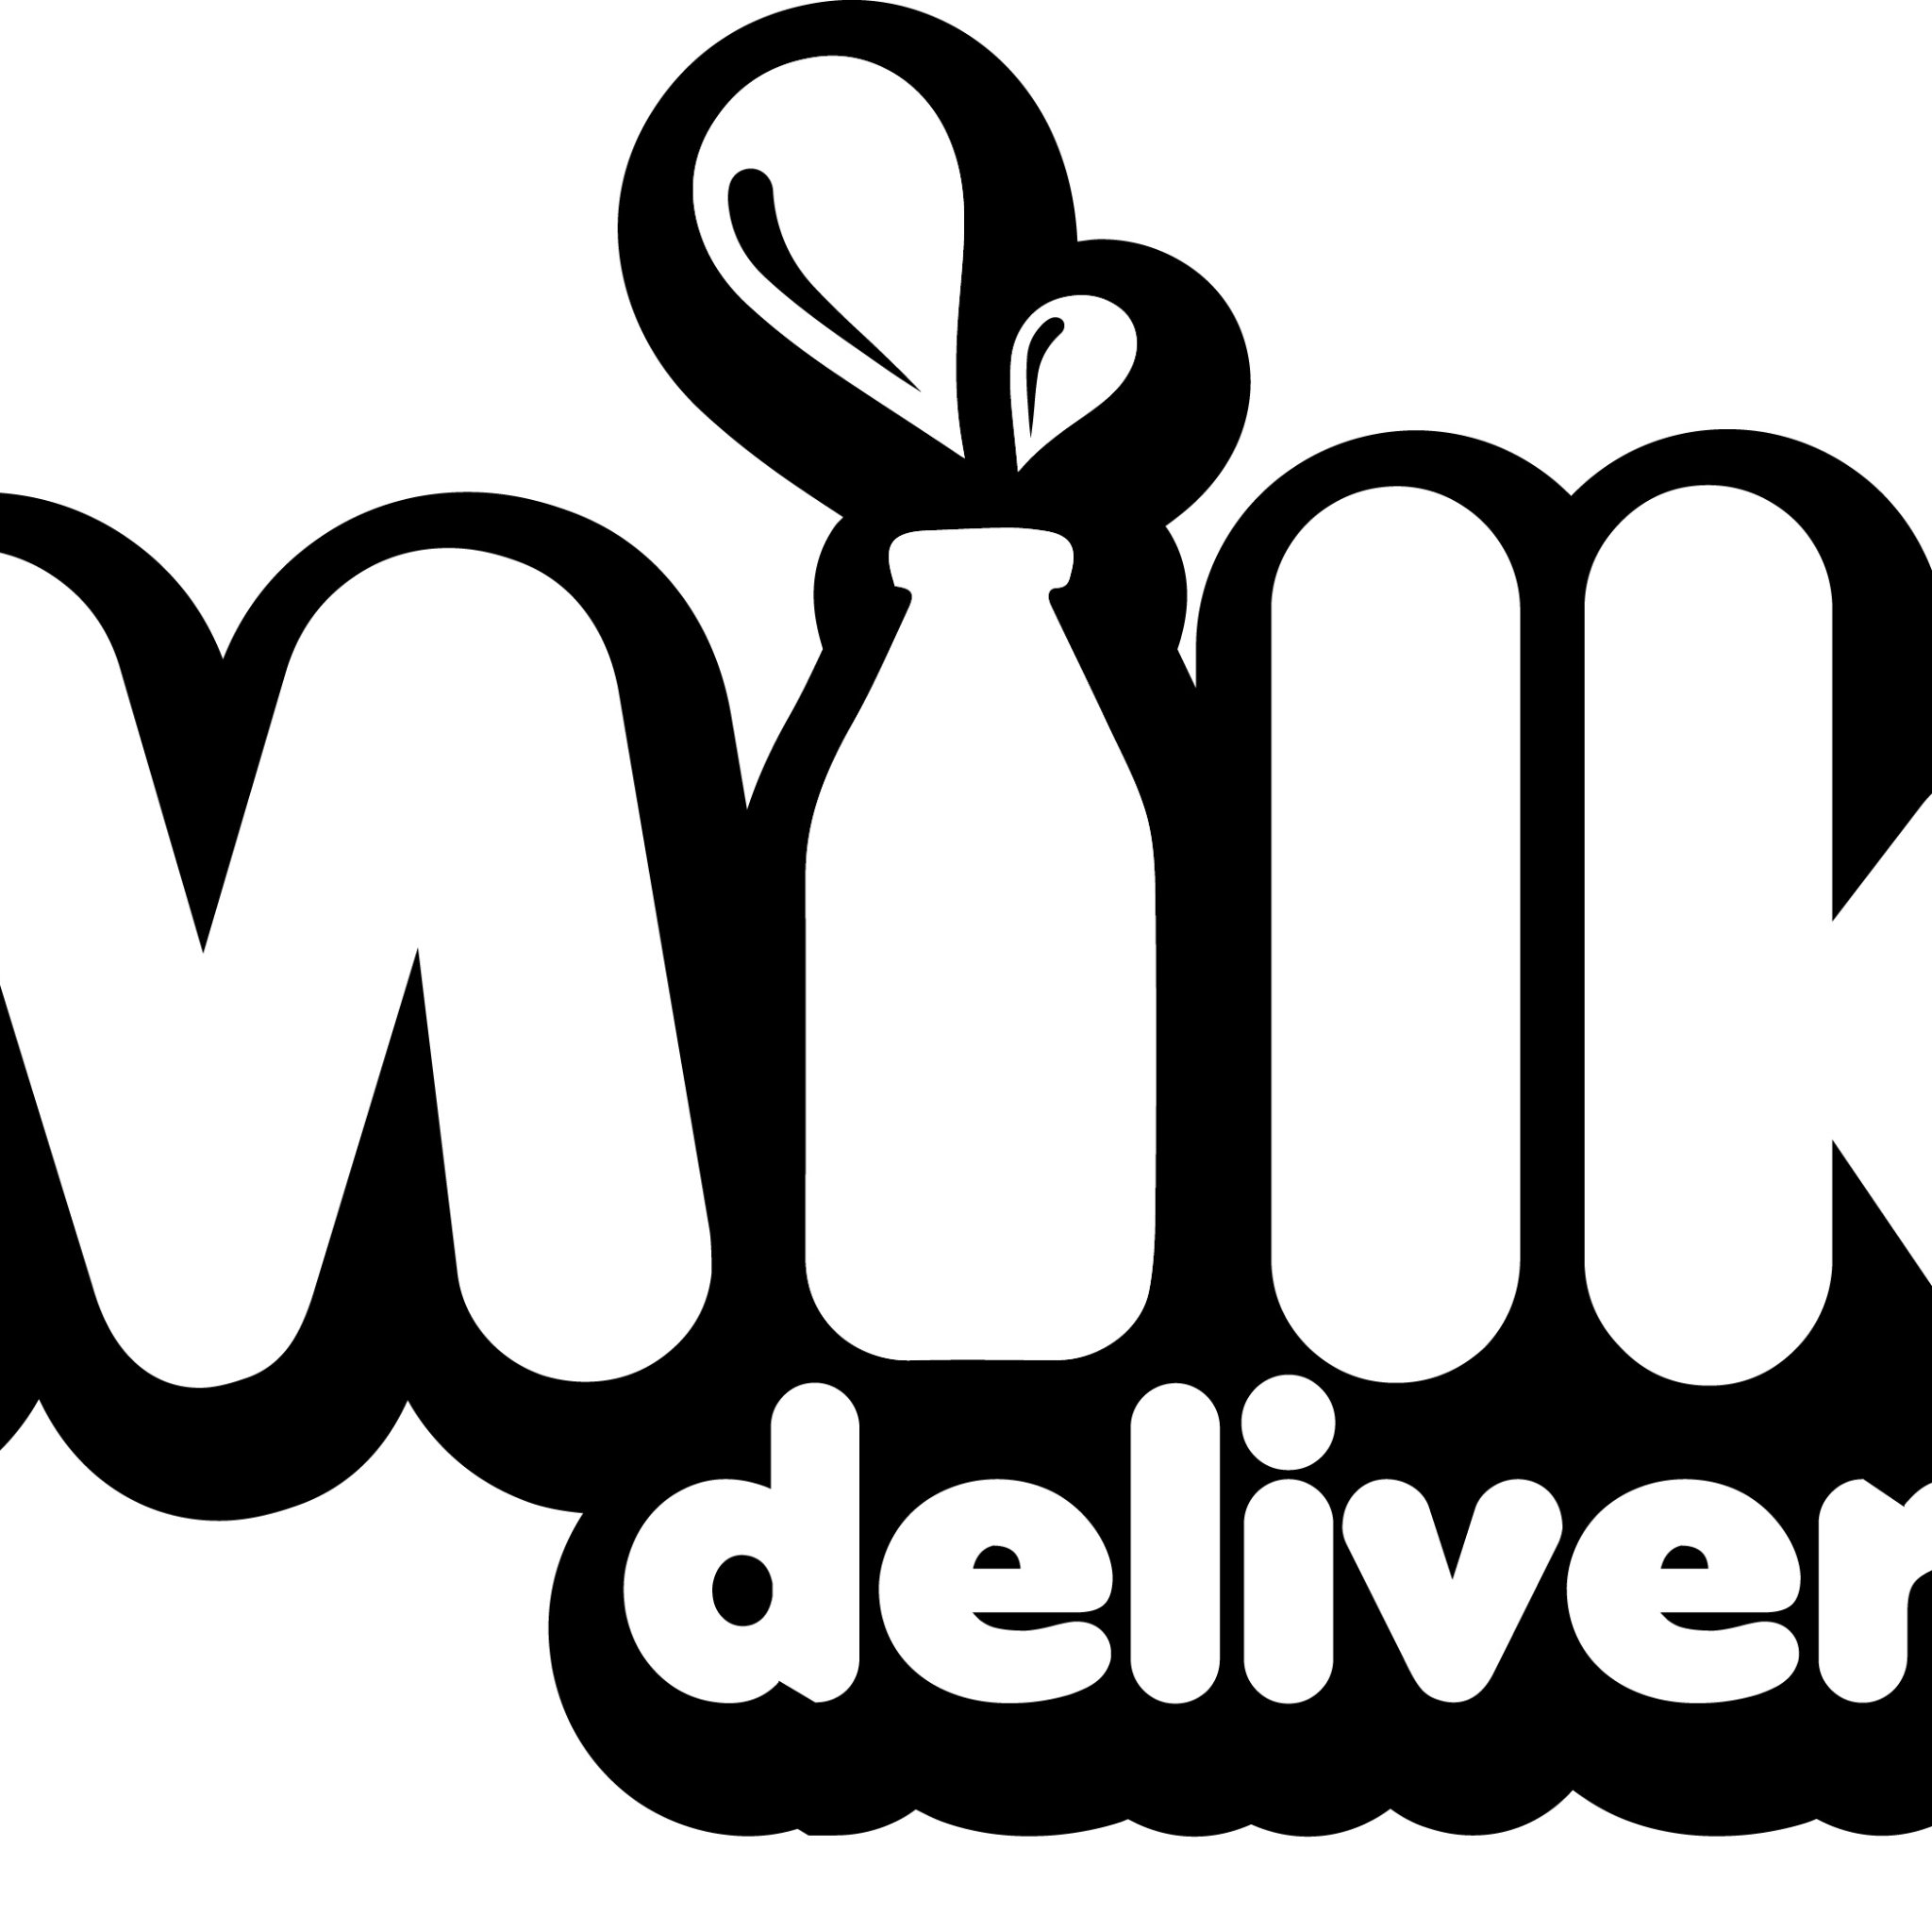 Local milk delivery company. Delivering fresh milk and much more throughout the East & West Midlands